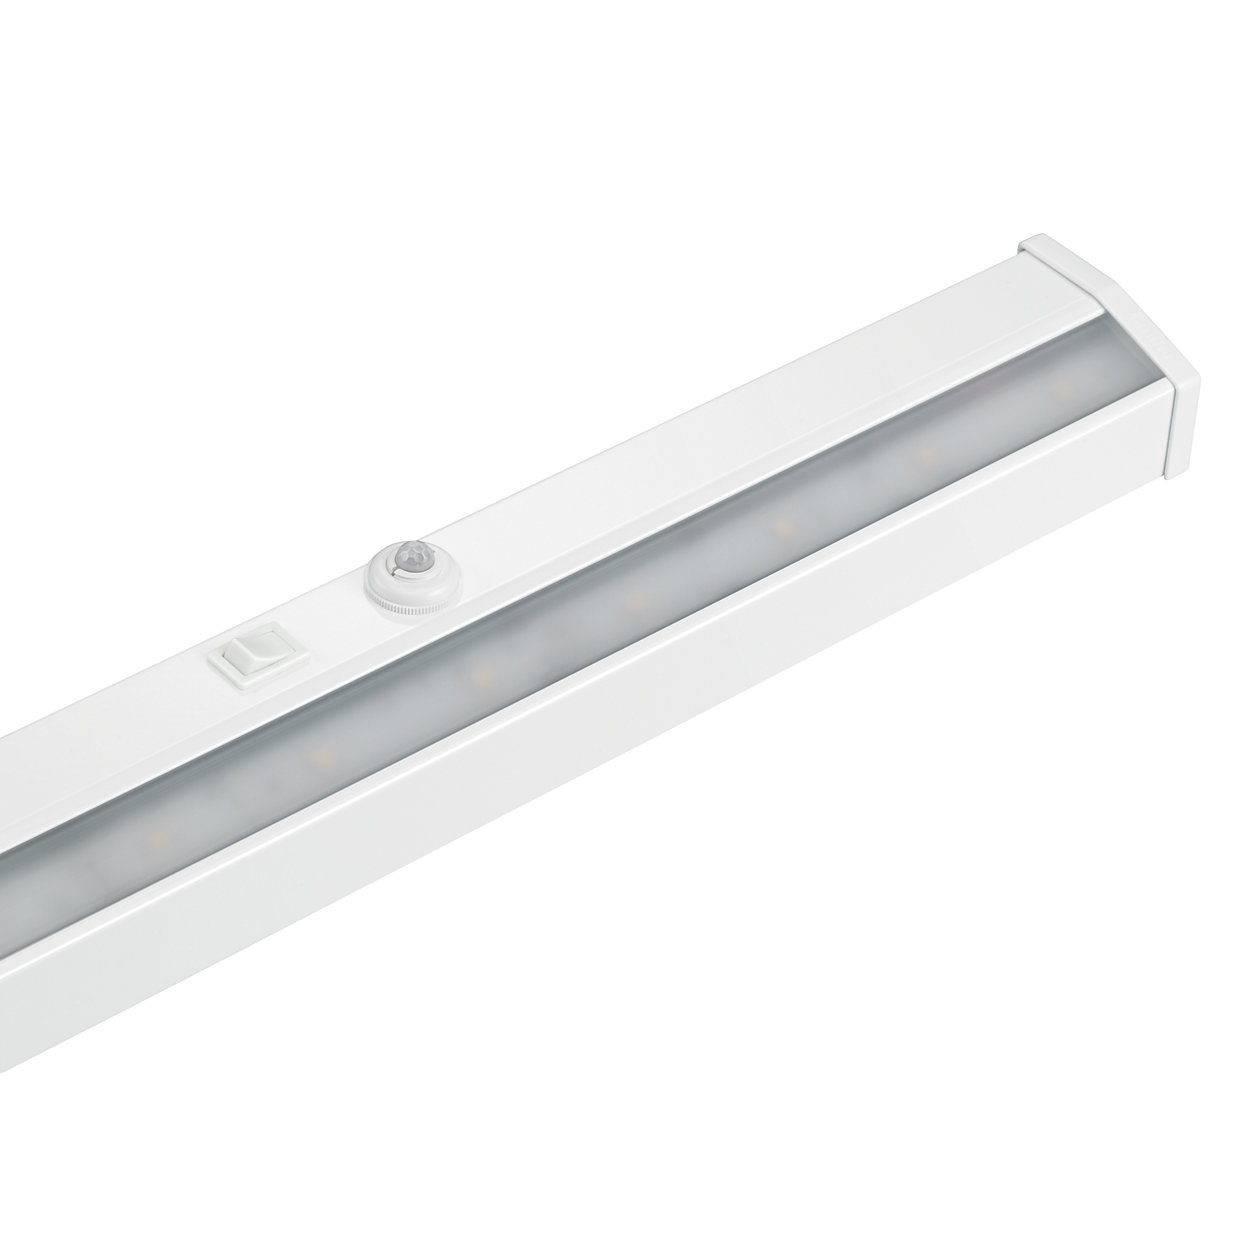 Under-cabinet workplace LED task light for rapid retrofits and exceptional energy savings